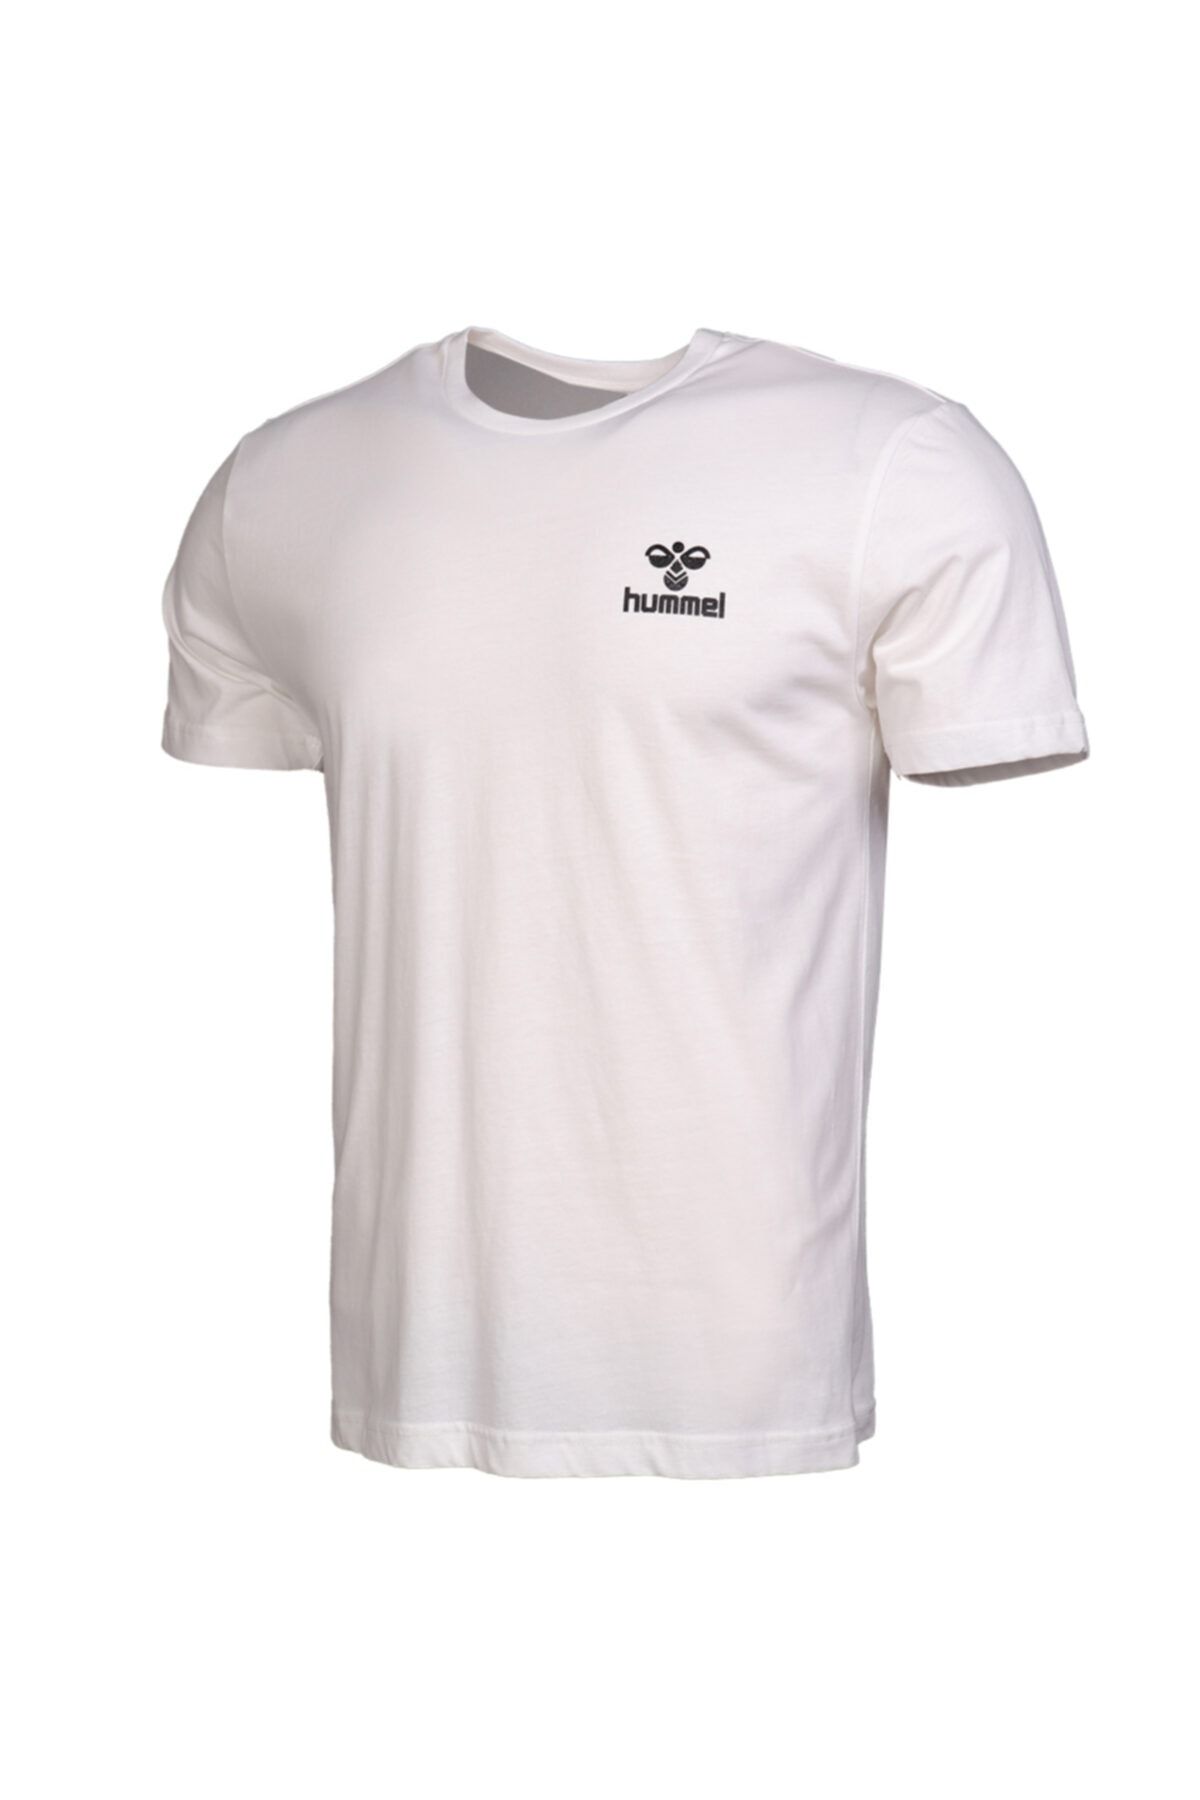 The Hummel Kaeton T-Shirt Presents A Stylish And Tough Silhouette With Its Plain Look. Contrasting With The Strong Hummel Icon Placed On Its Solid Color, The T-Shirt Fits Your Body Perfectly And Provides Sporty Comfort. 100% Cotton